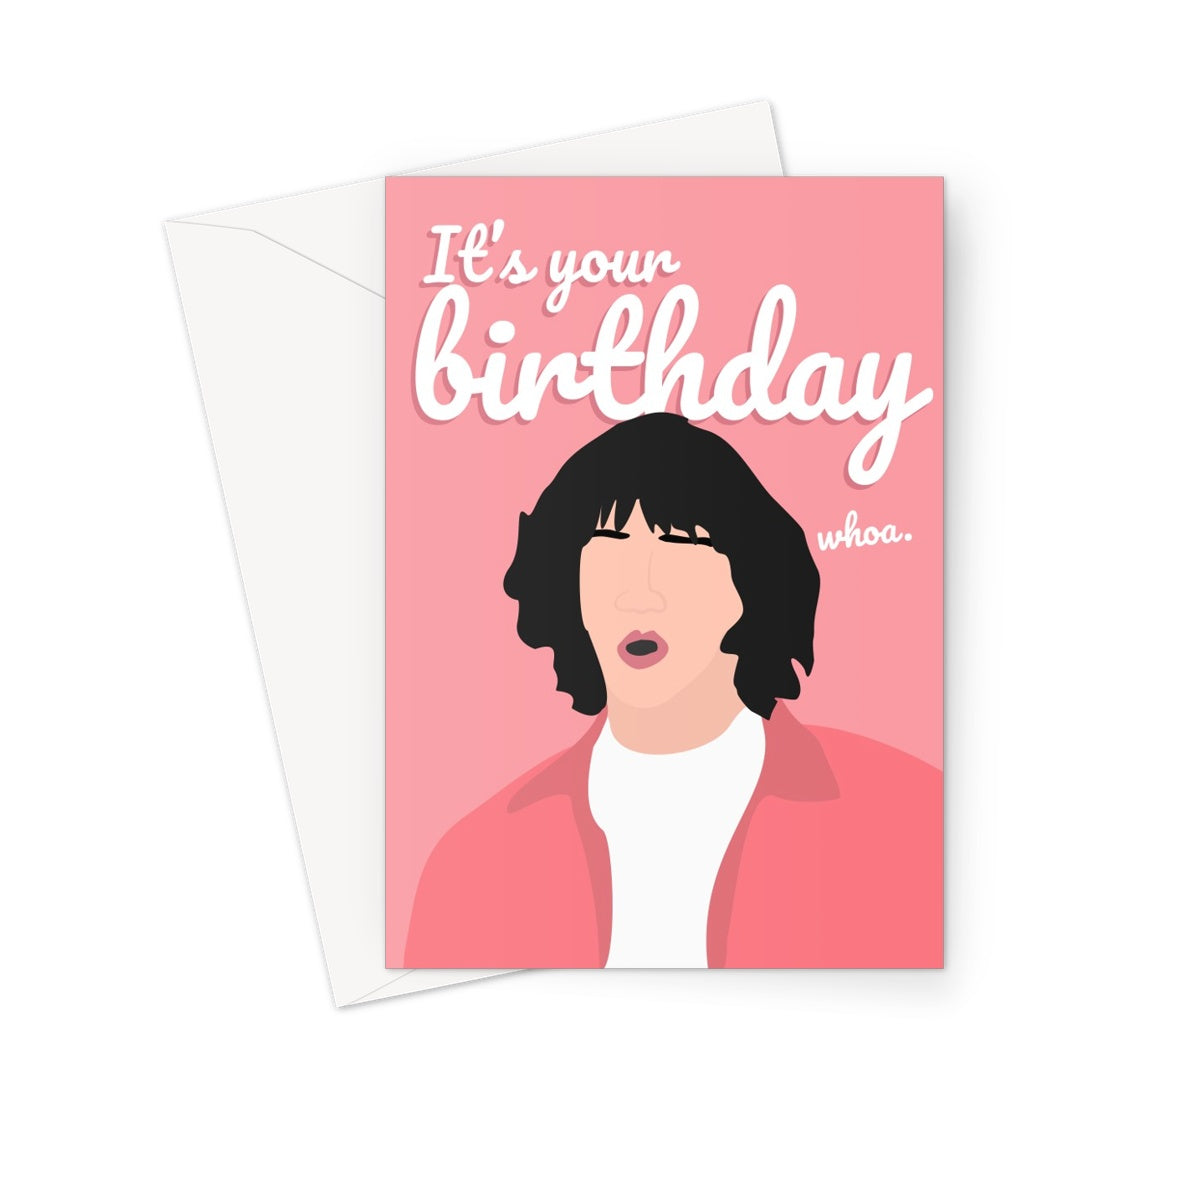 Young Keanu Reeves It's Your Birthday Whoa Woah Greeting Card